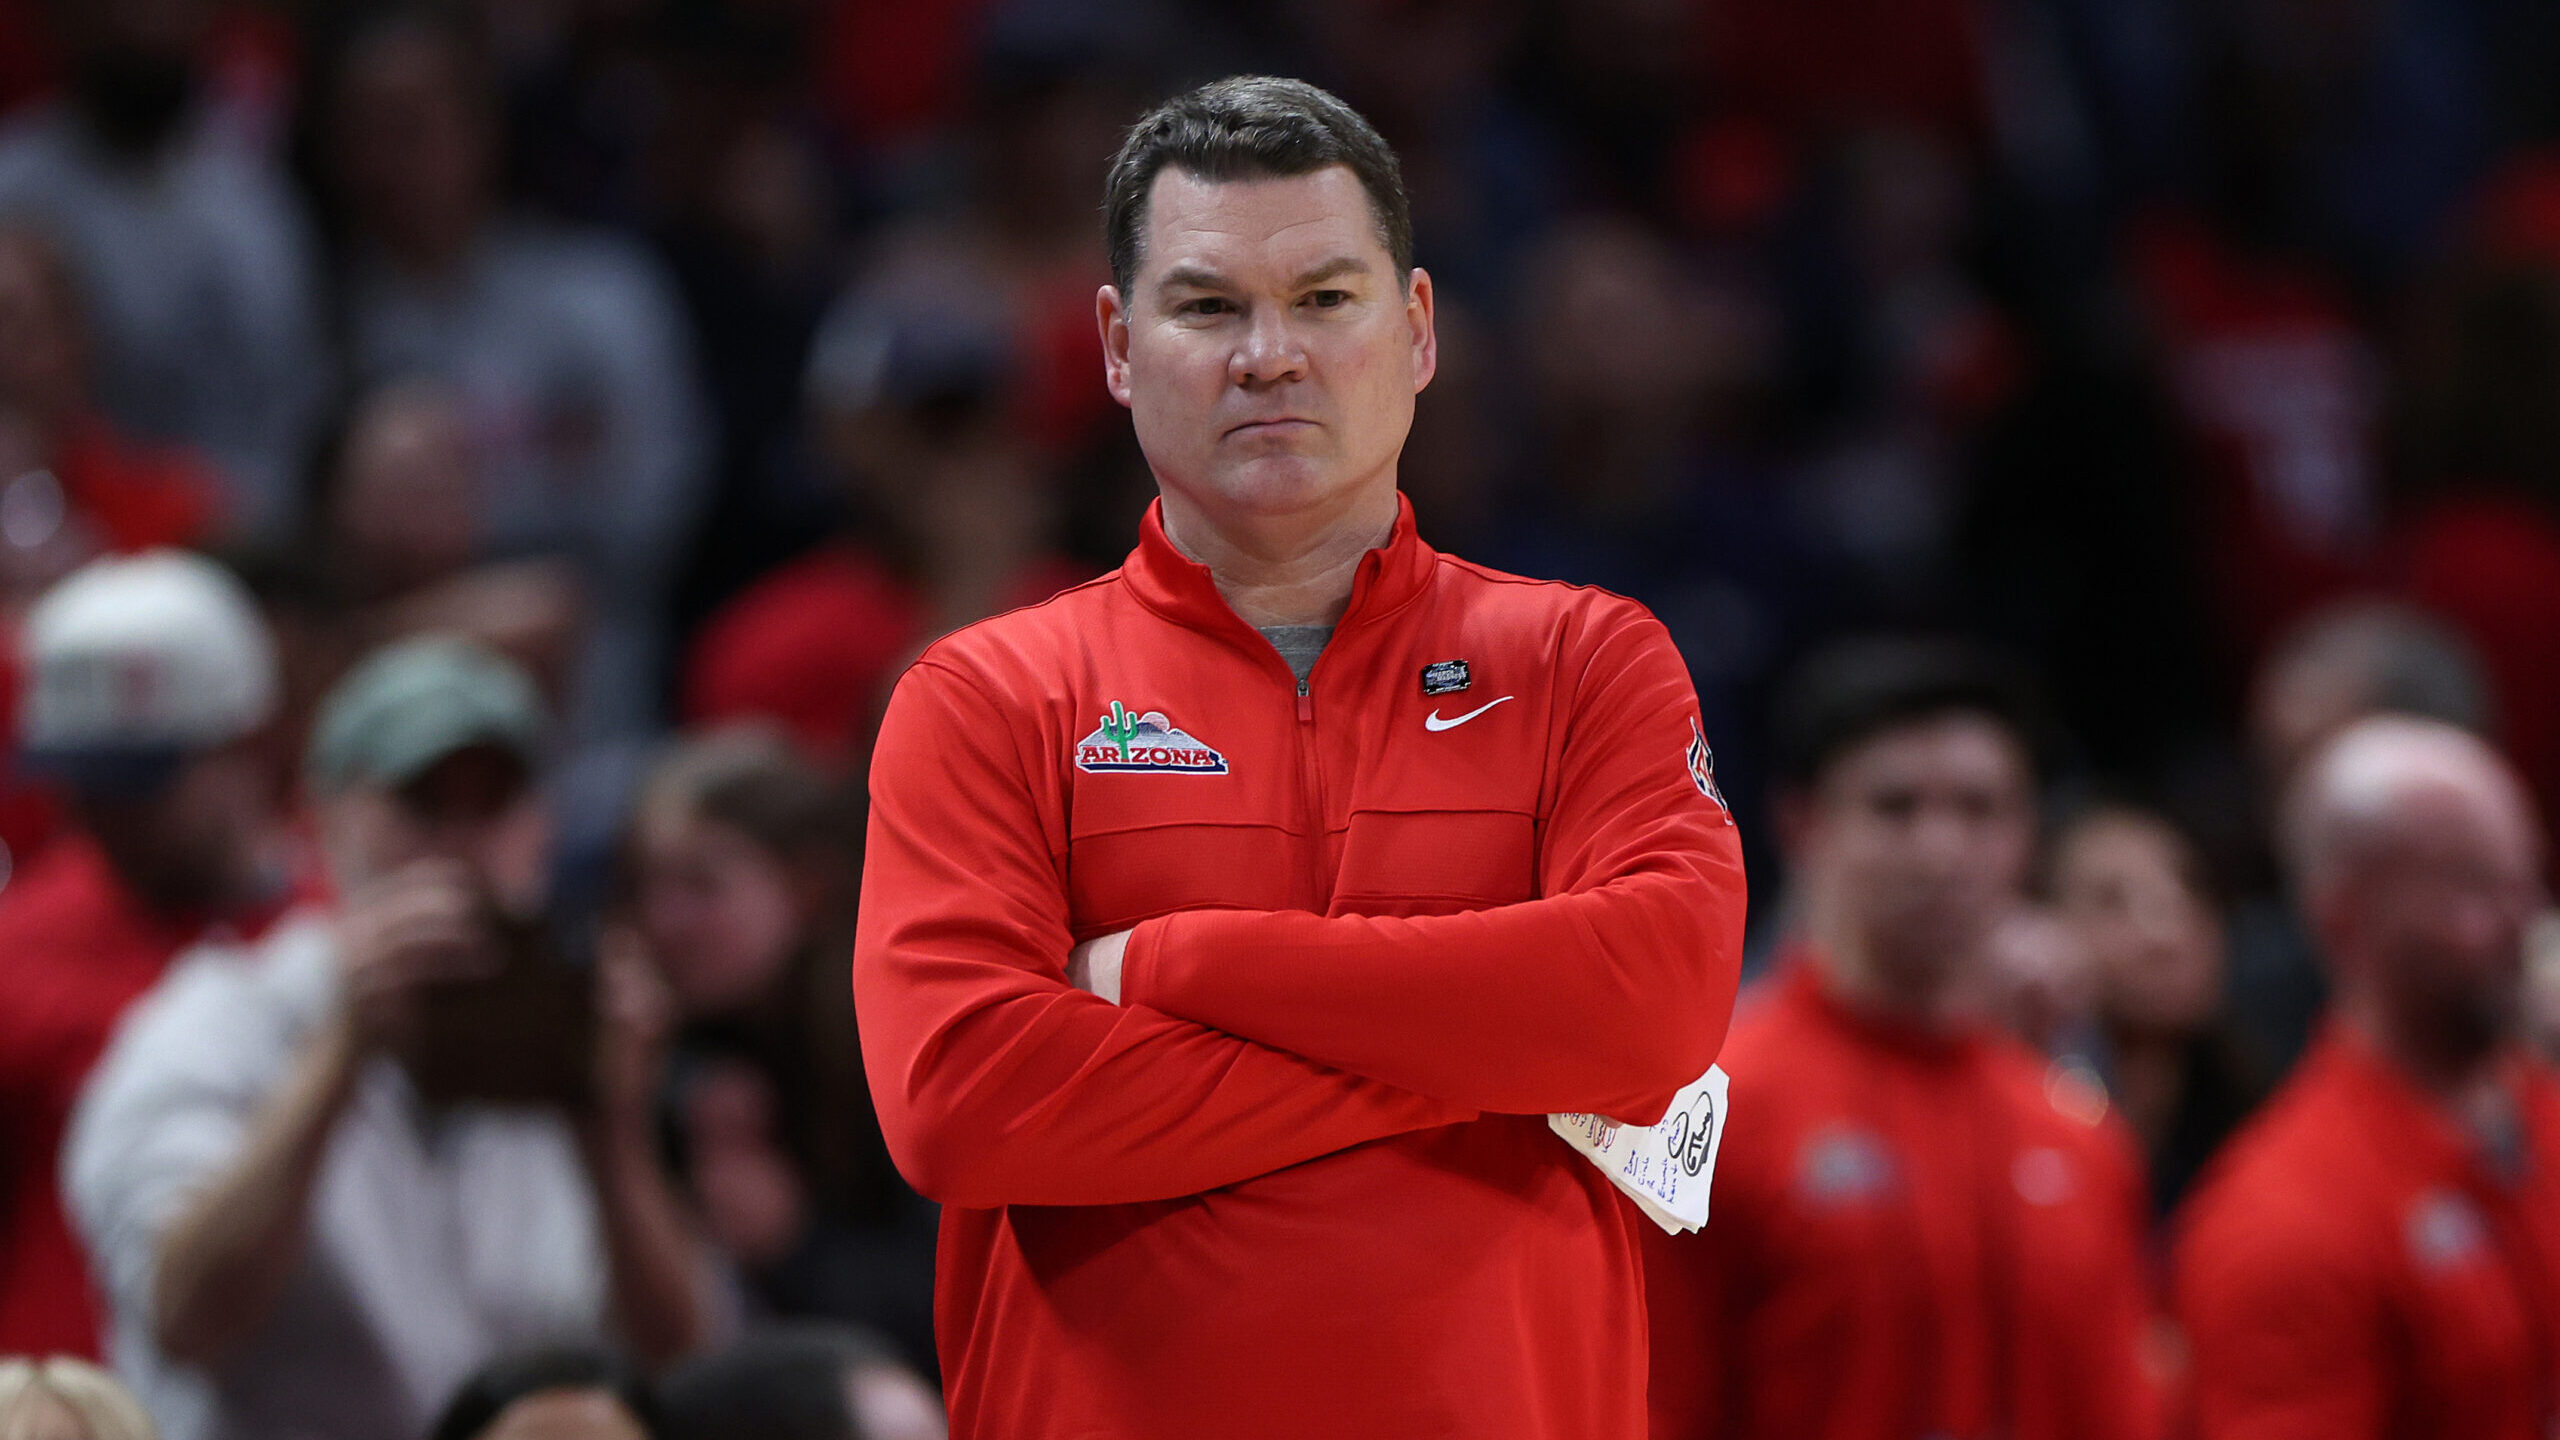 After Sweet 16 loss, Arizona Wildcats' coach Tommy Lloyd says 'our day in the sun will come'